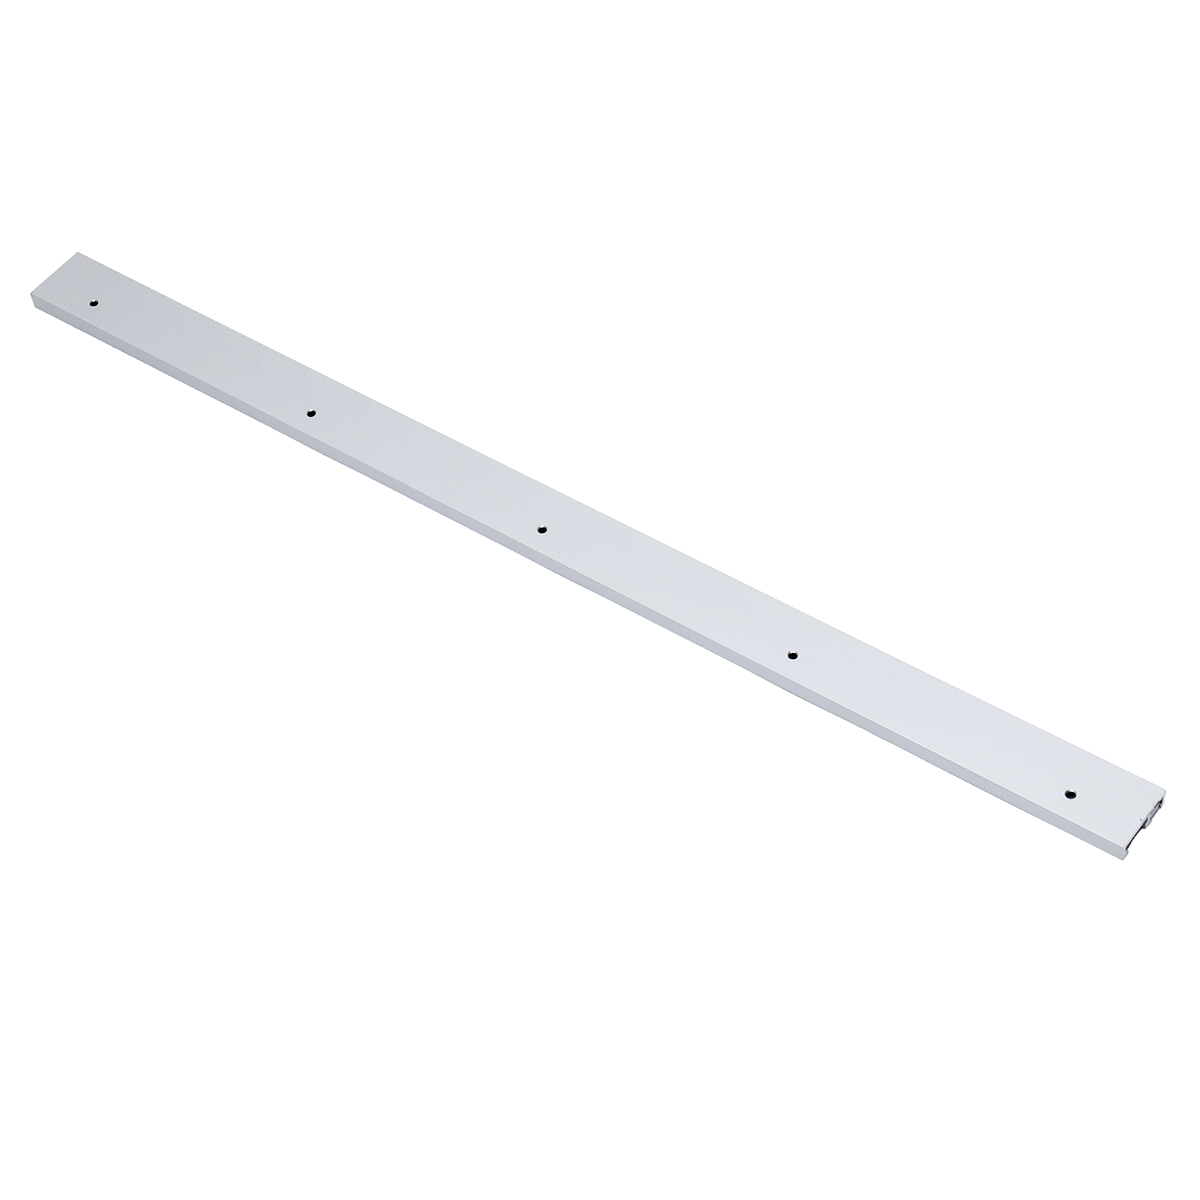 400-1220mm-Aluminum-Alloy-T-Track-T-slot-Miter-Track-with-Slide-Metric-Ruler-Scale-for-Table-Saw-Rou-1462377-5